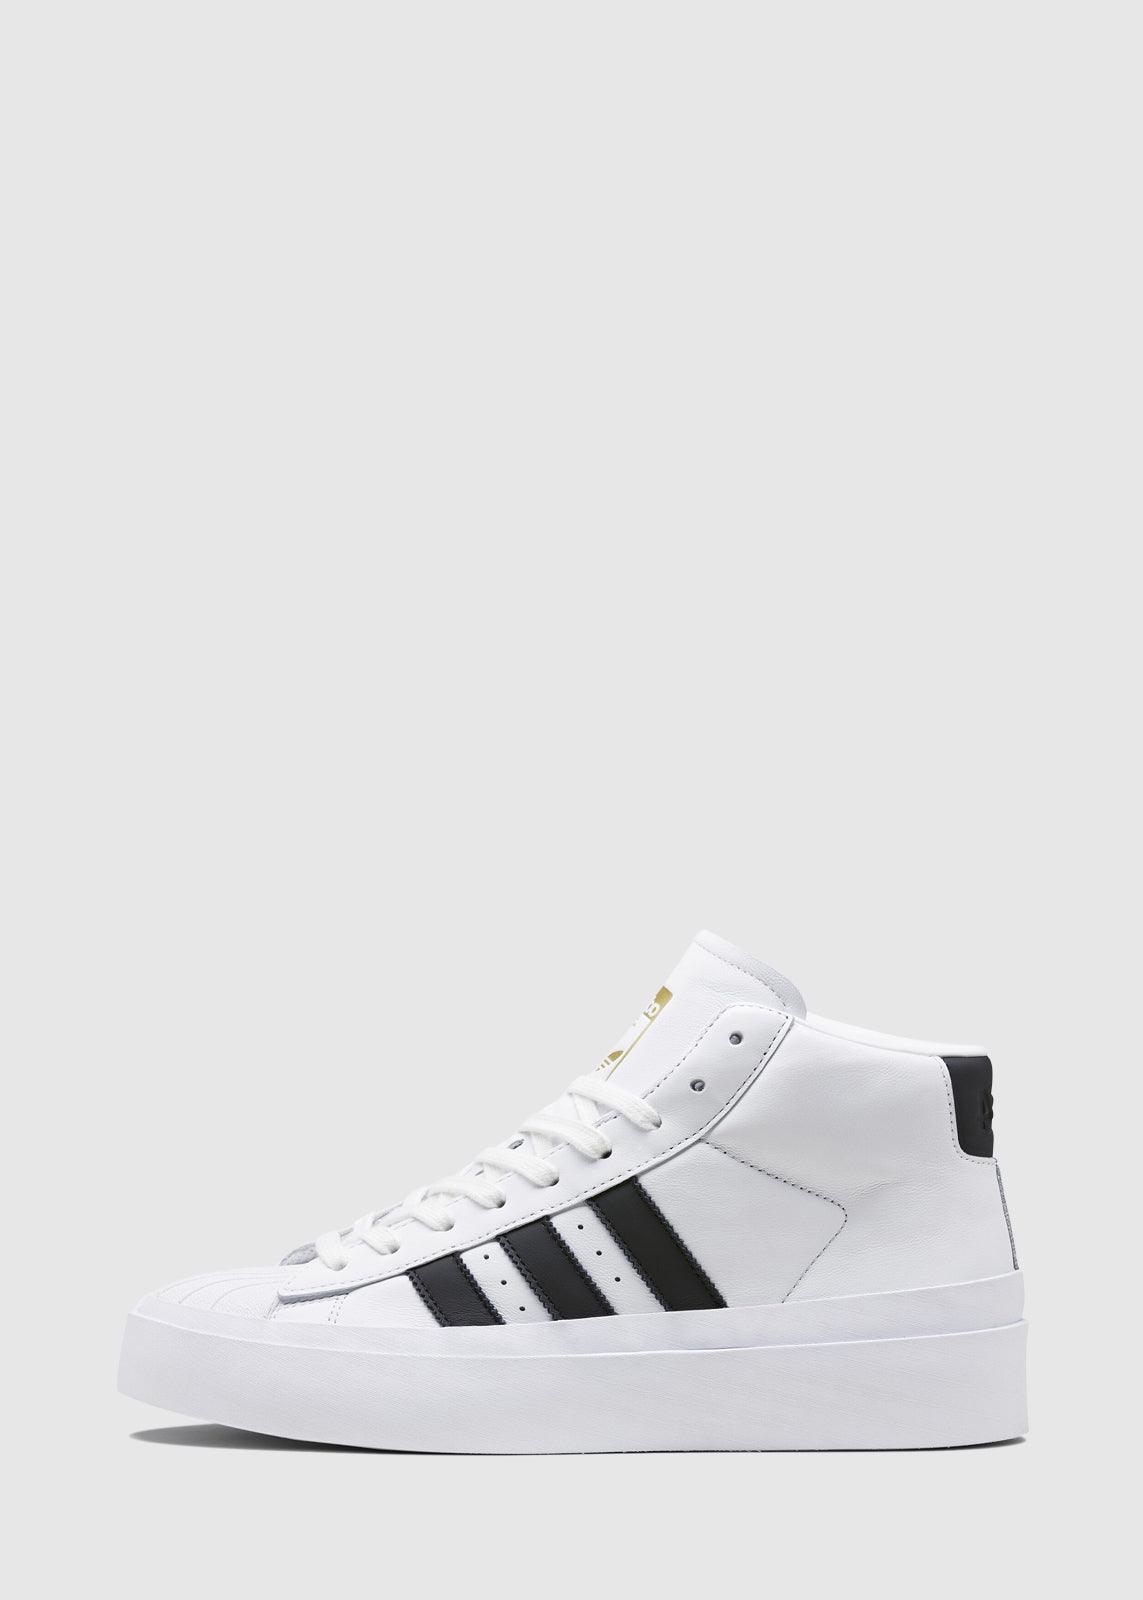 black and white high top adidas